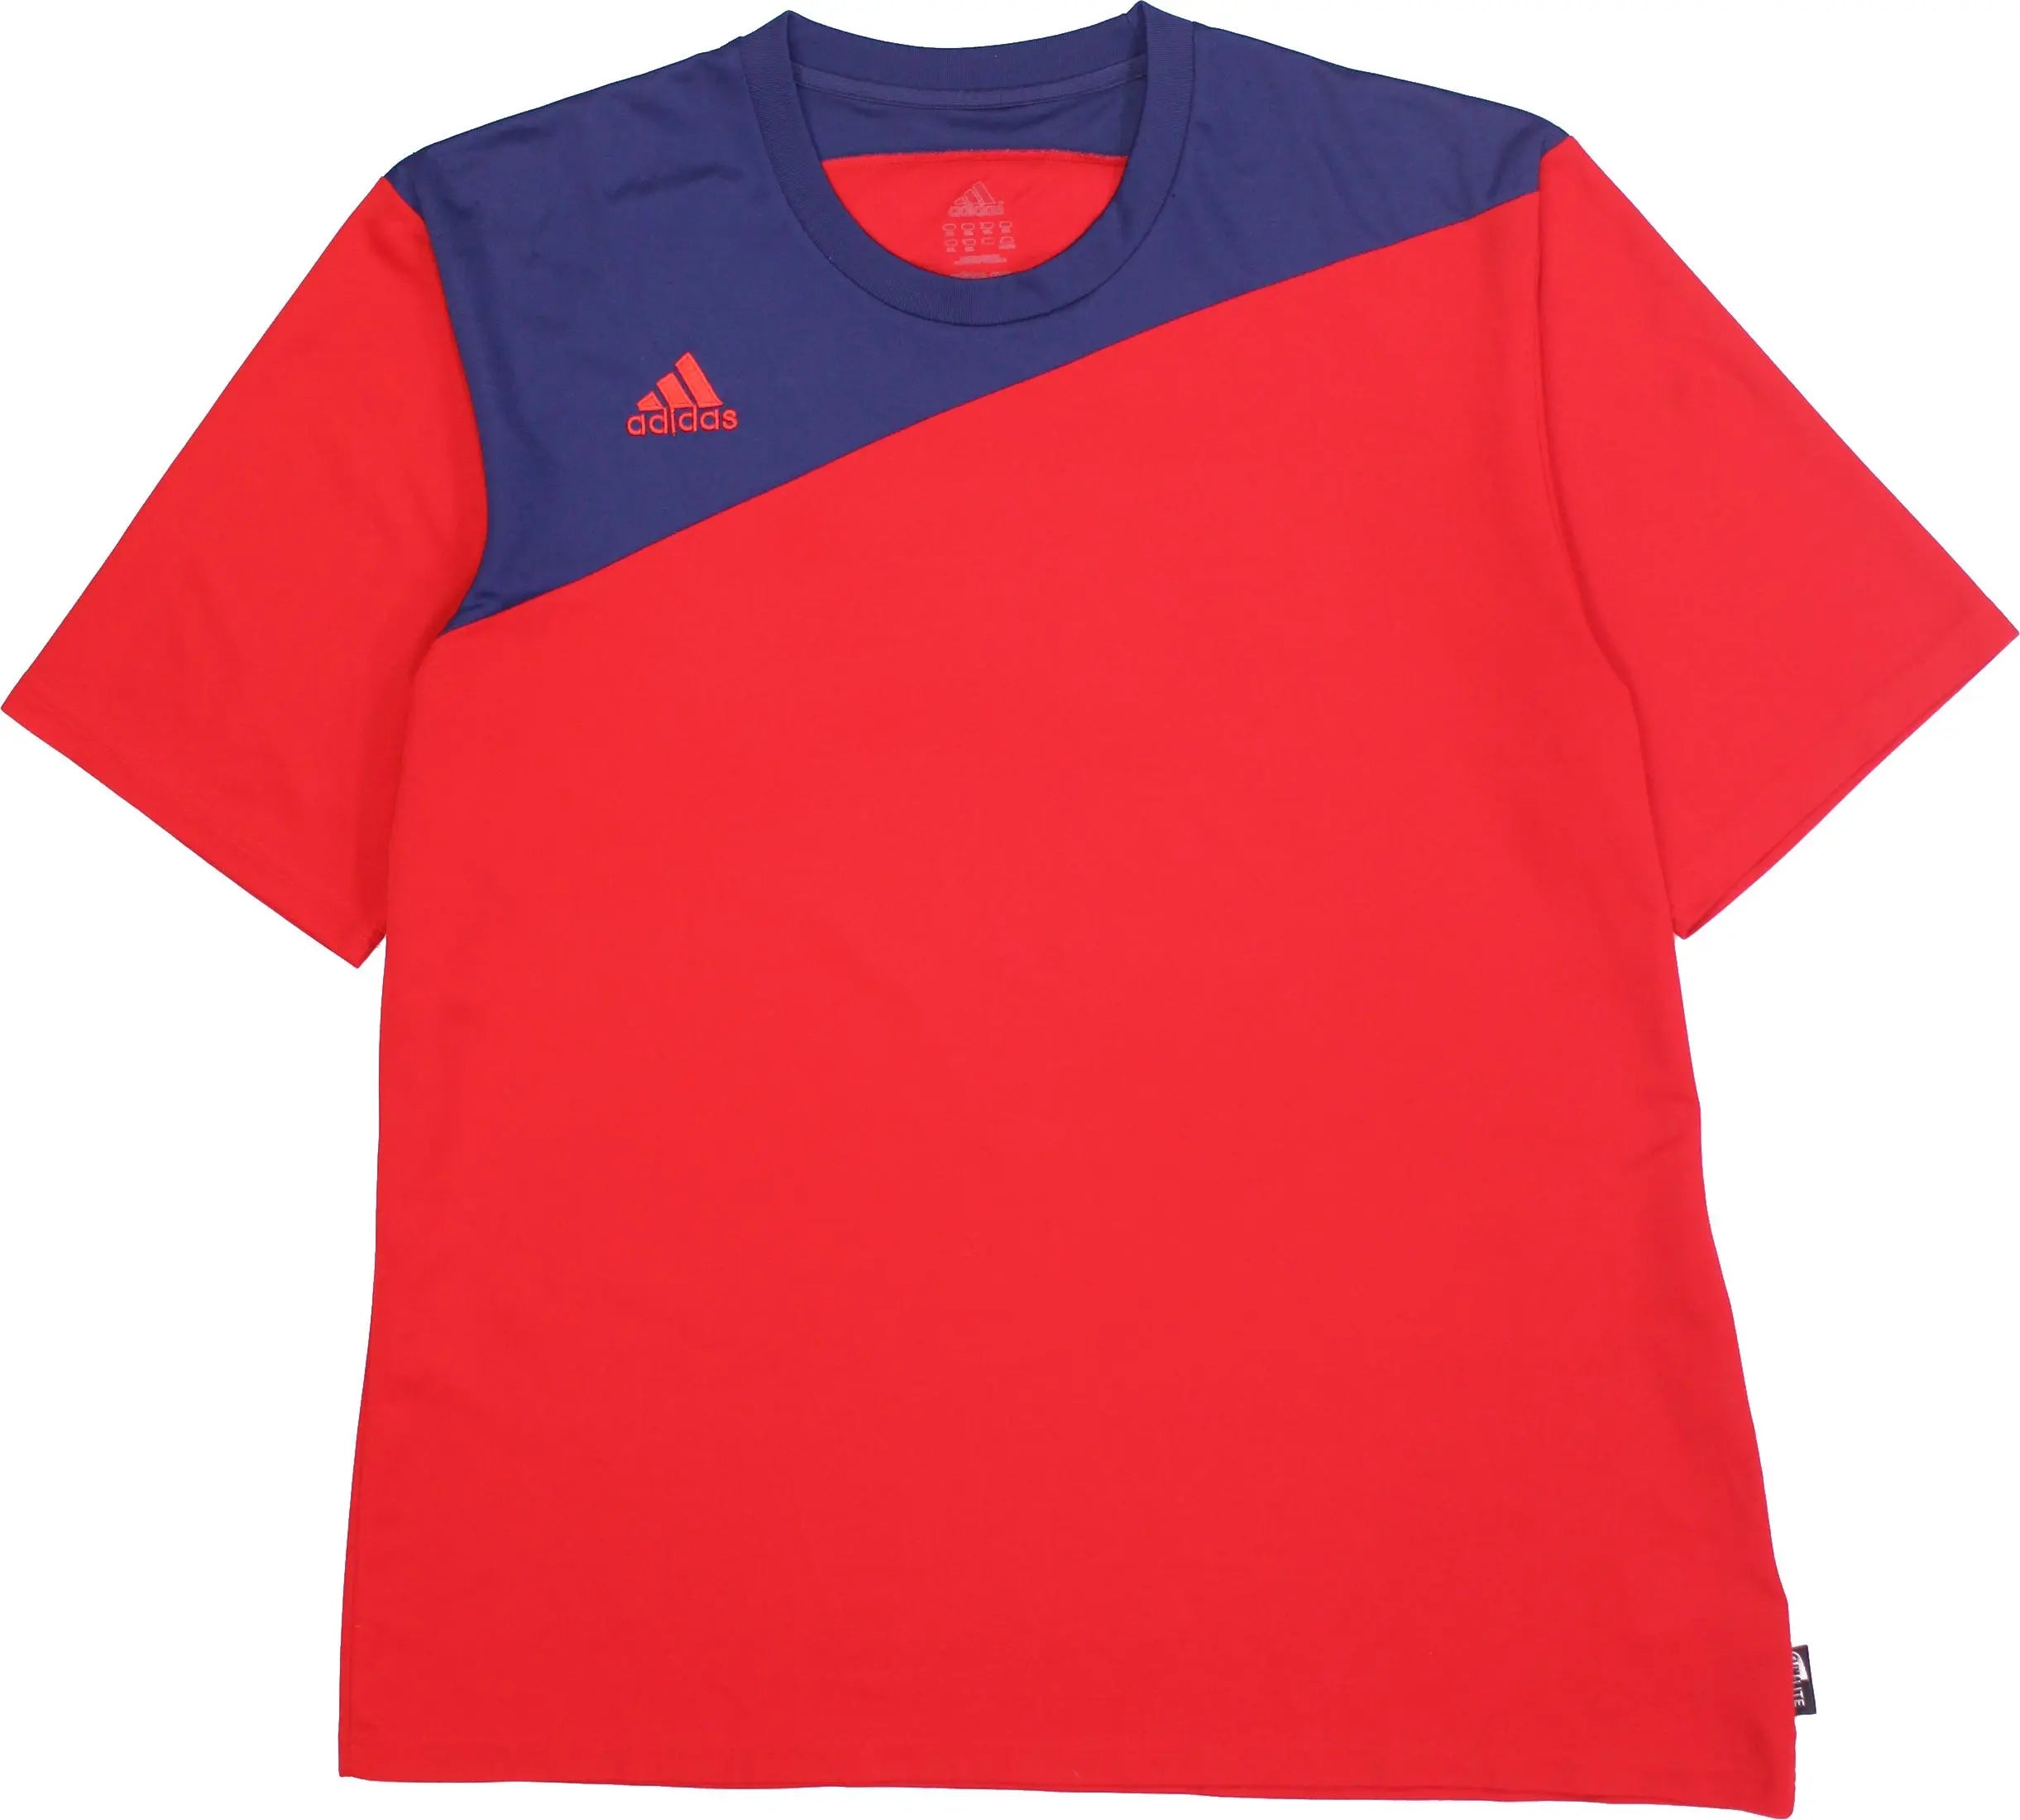 Adidas - Red T-shirt by Adidas- ThriftTale.com - Vintage and second handclothing